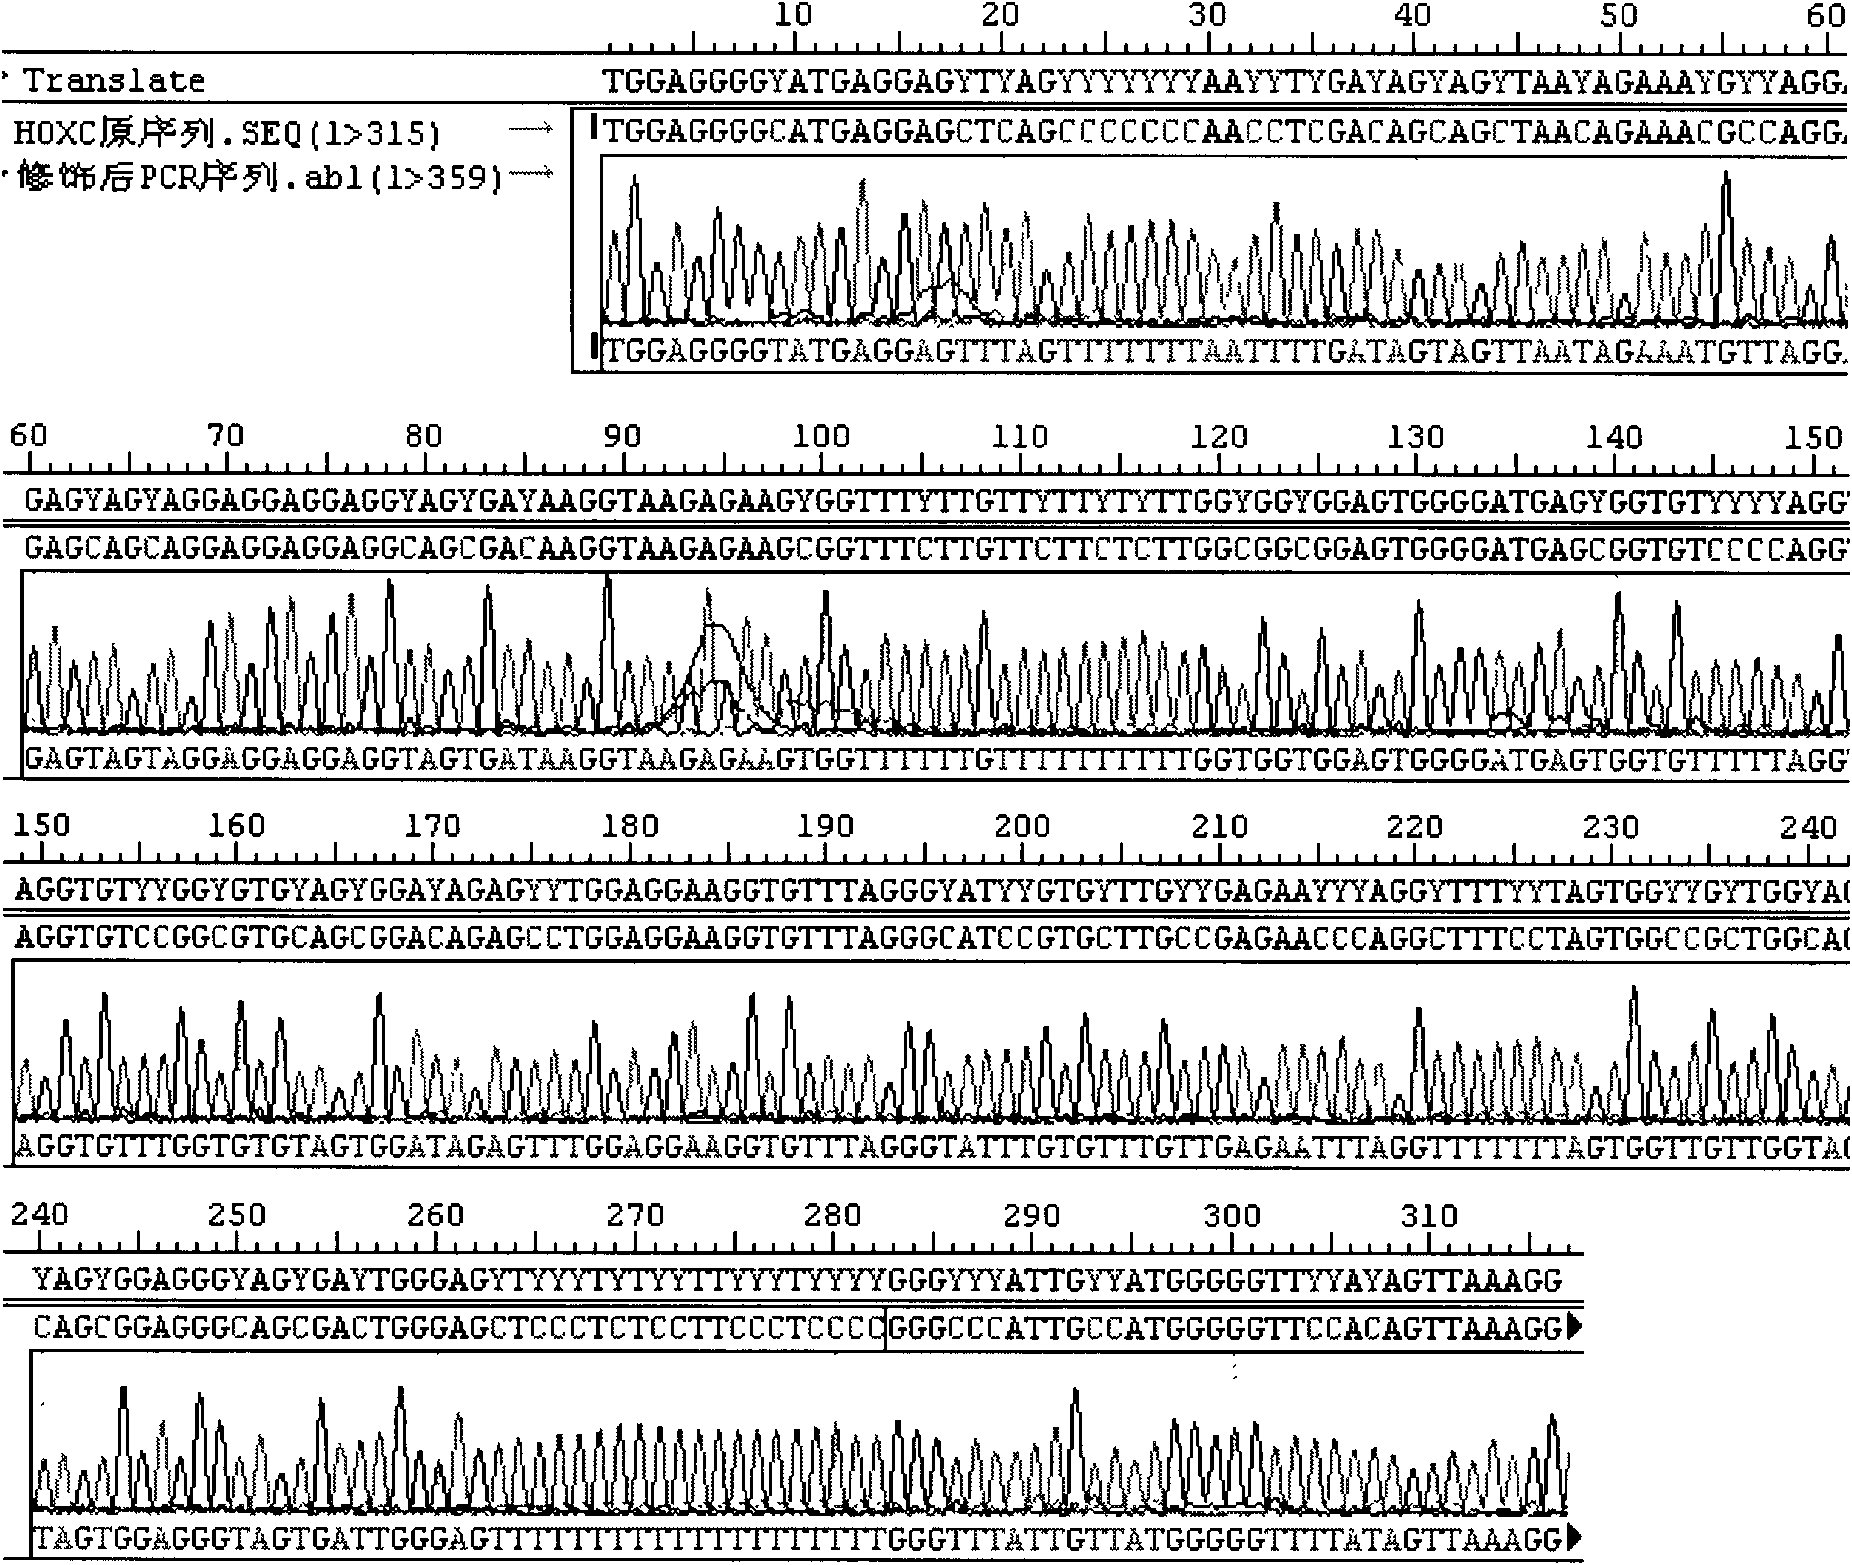 Kit and method for rapidly detecting DNA methylation